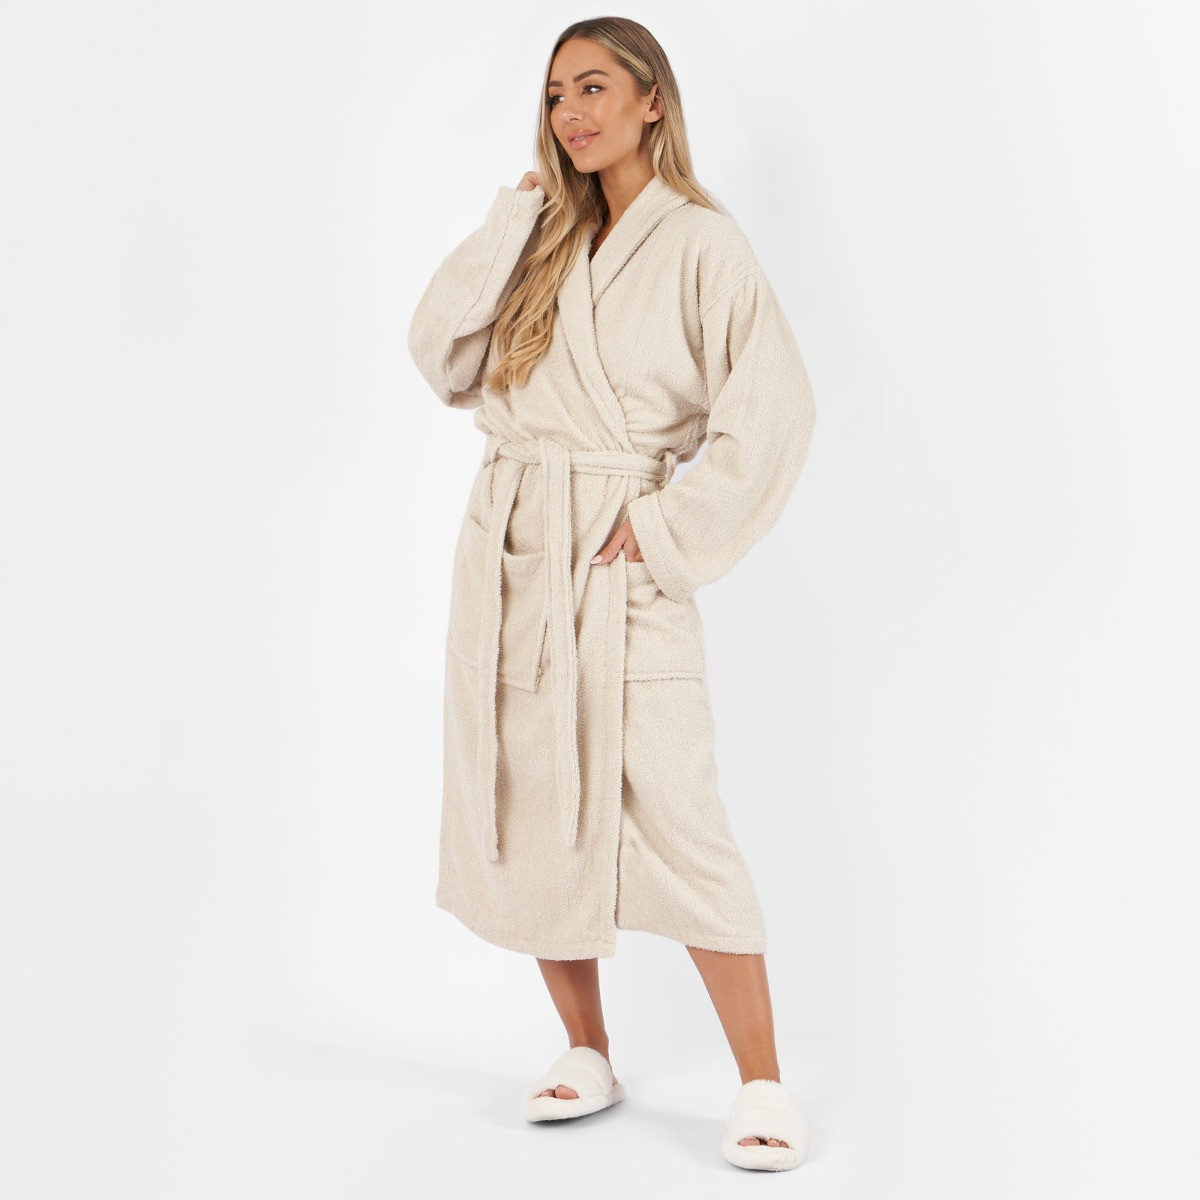 Brentfords 100% Cotton Towelling Dressing Gown, Adults - Natural Beige>